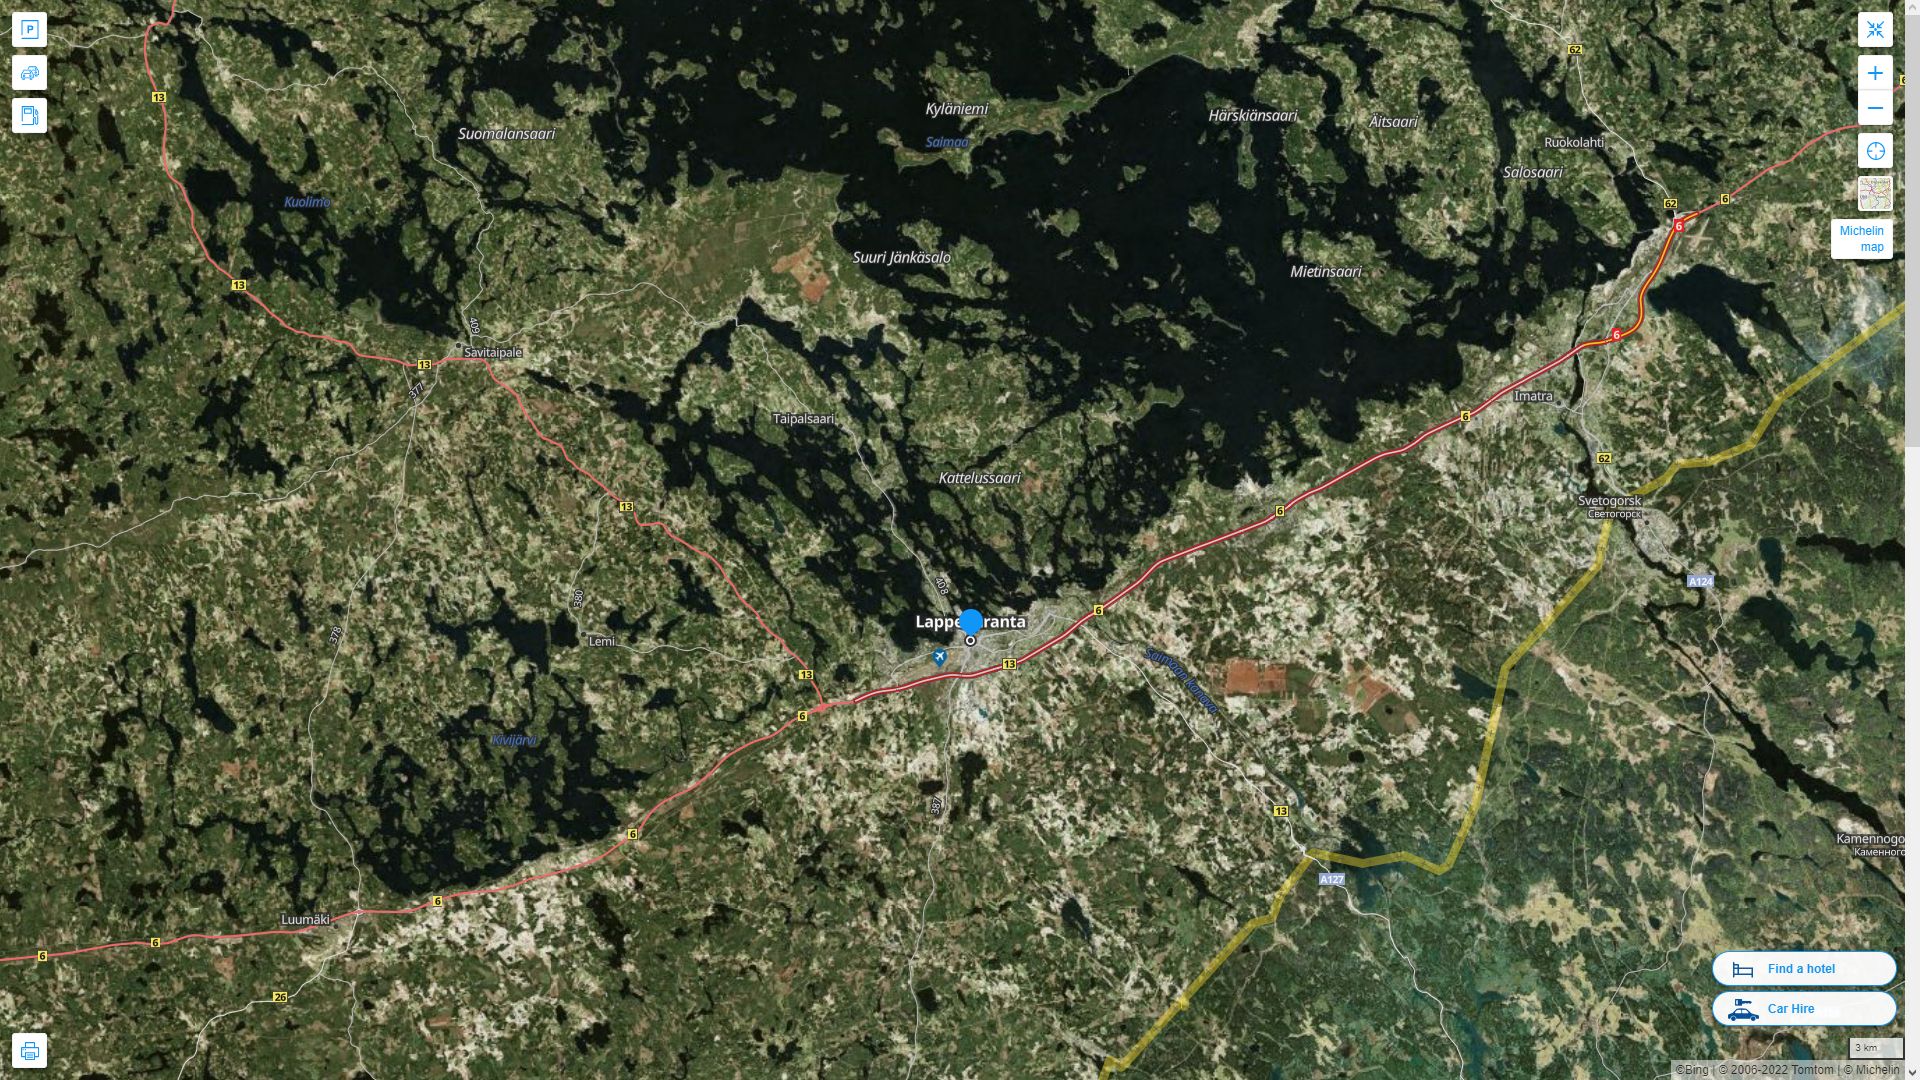 Lappeenranta Highway and Road Map with Satellite View